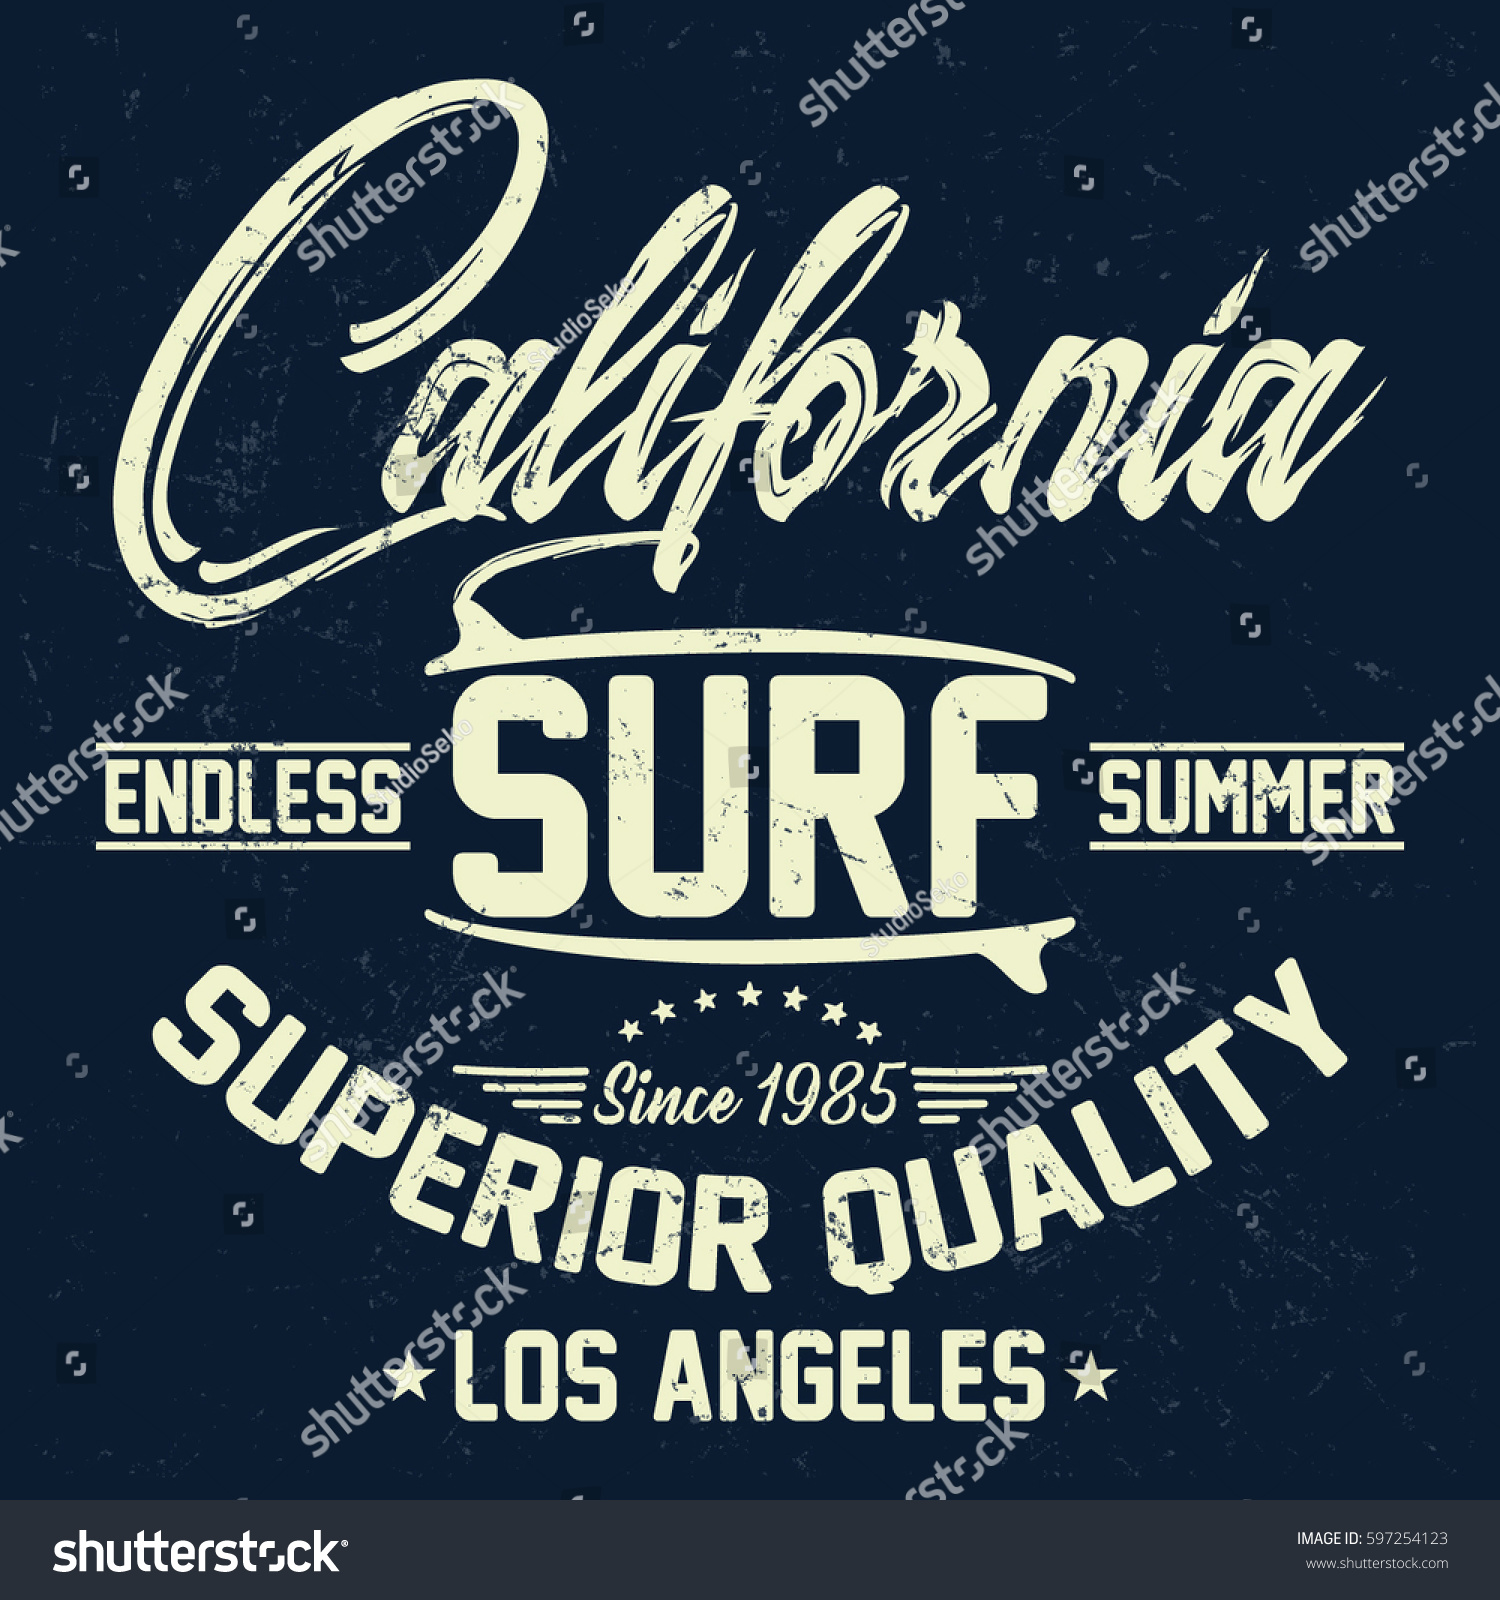 Download California Endless Summer Surf Typography Tshirt Stock ...